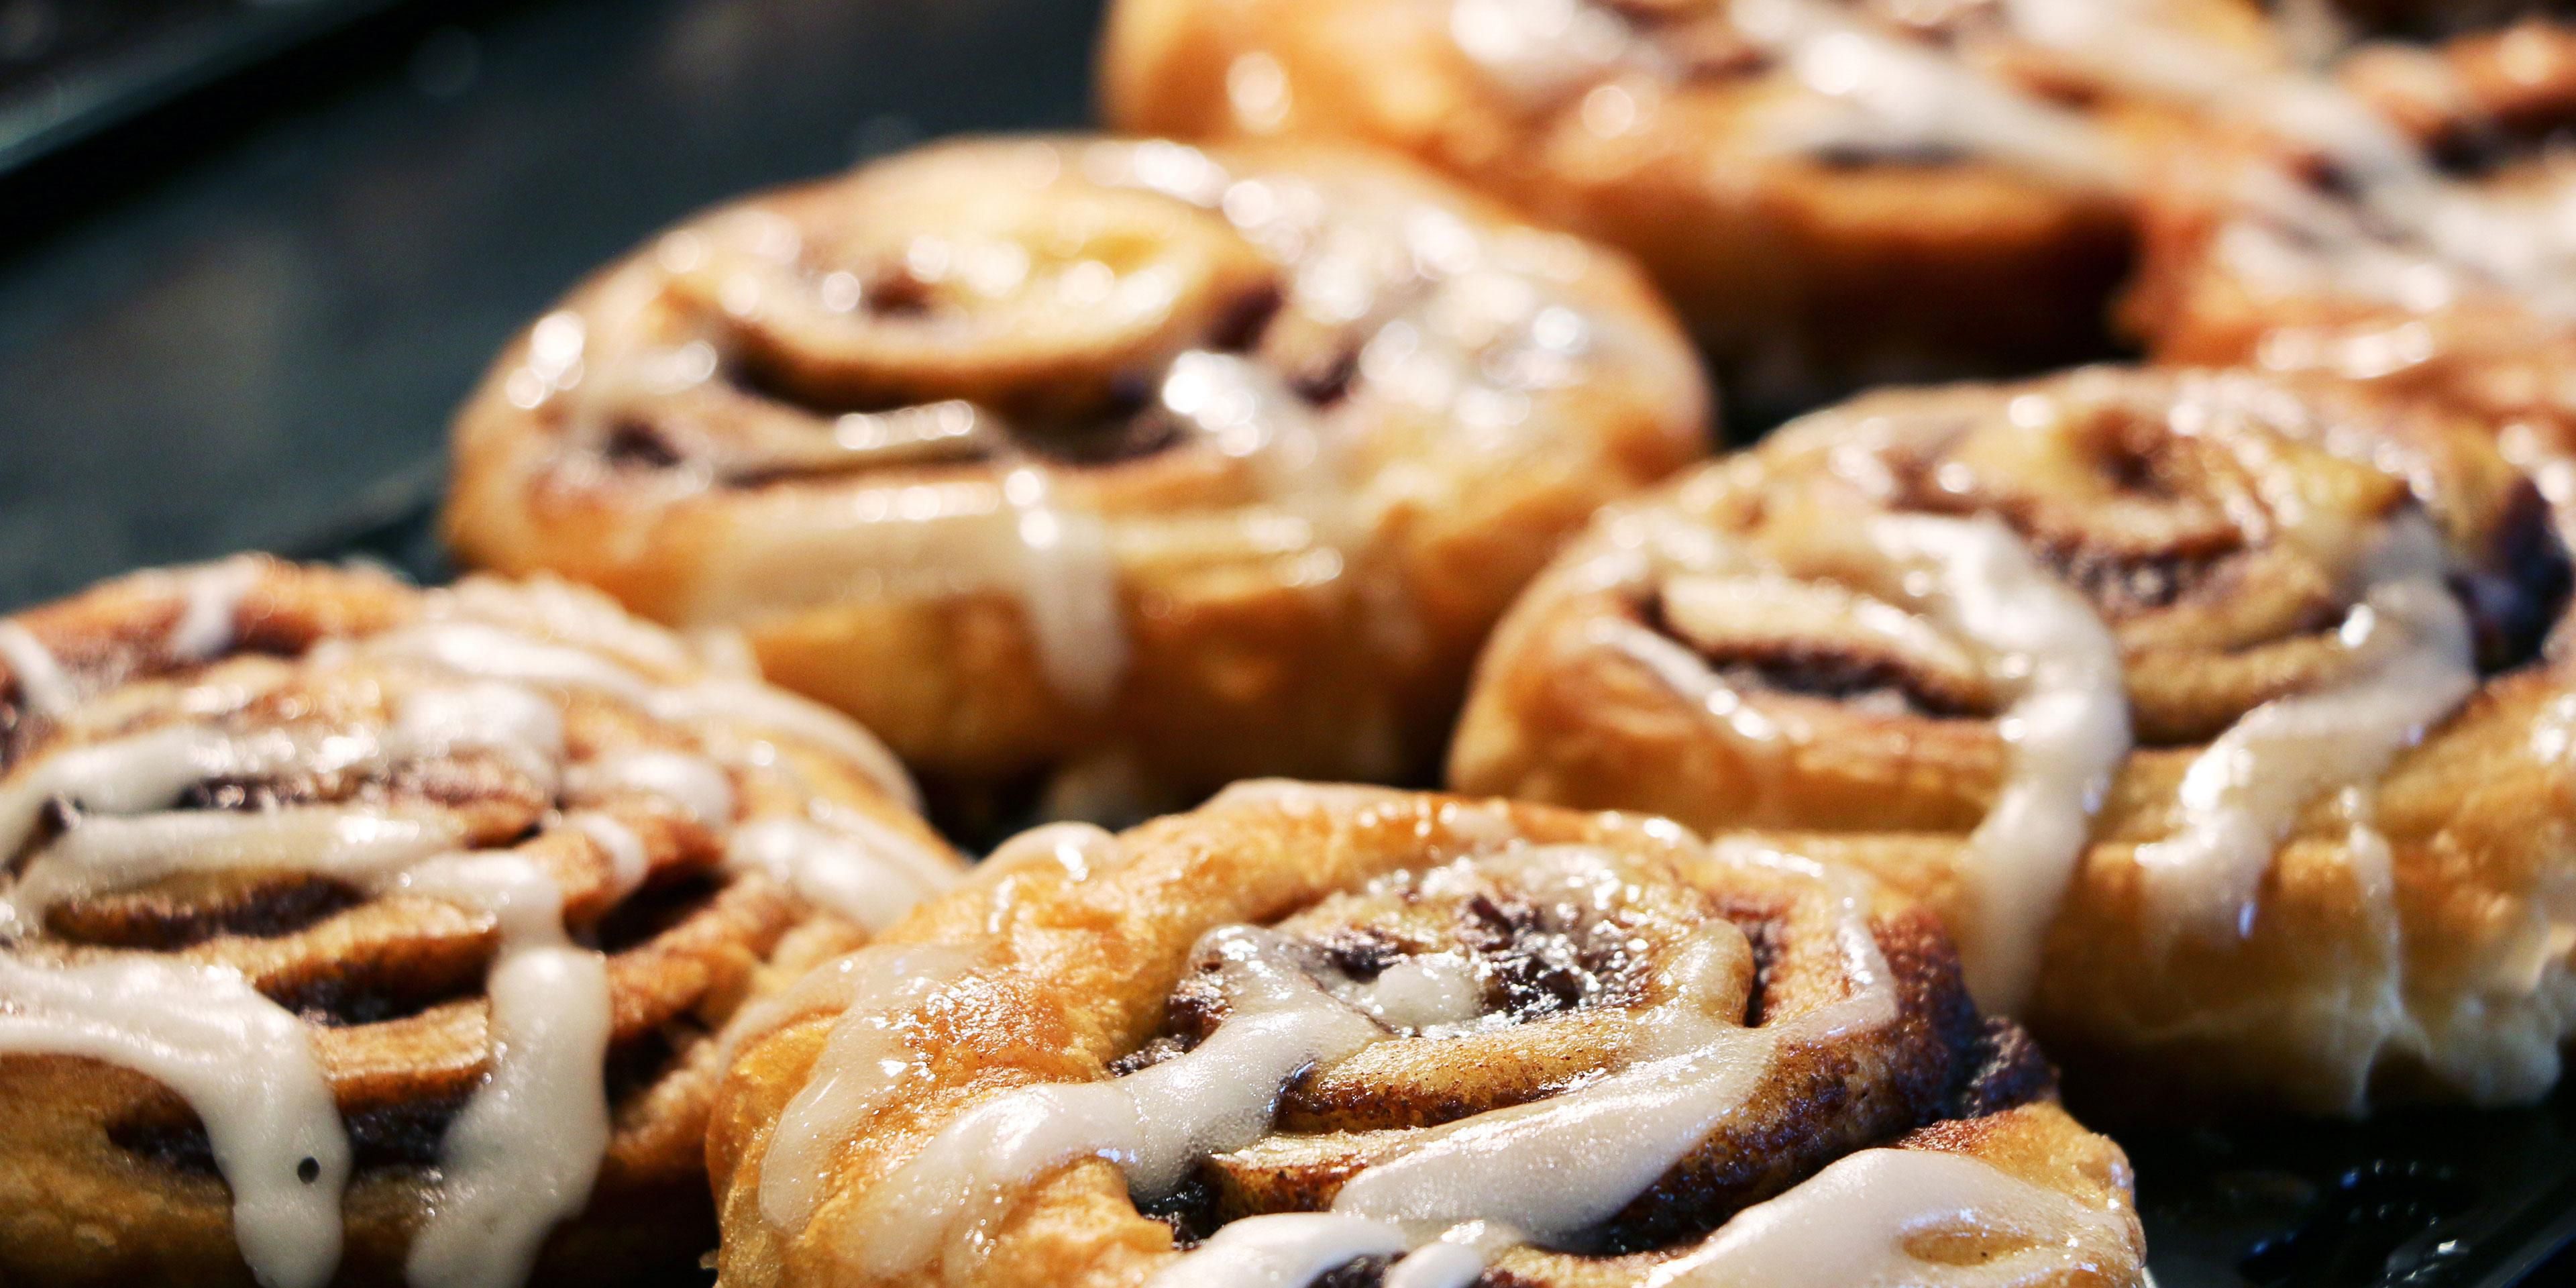 The most important meal of the day awaits you from 6:30-9:30am (Monday -Friday) and 7:00am-10am (Saturday and Sunday). Don't forget one of our signature cinnamon rolls.